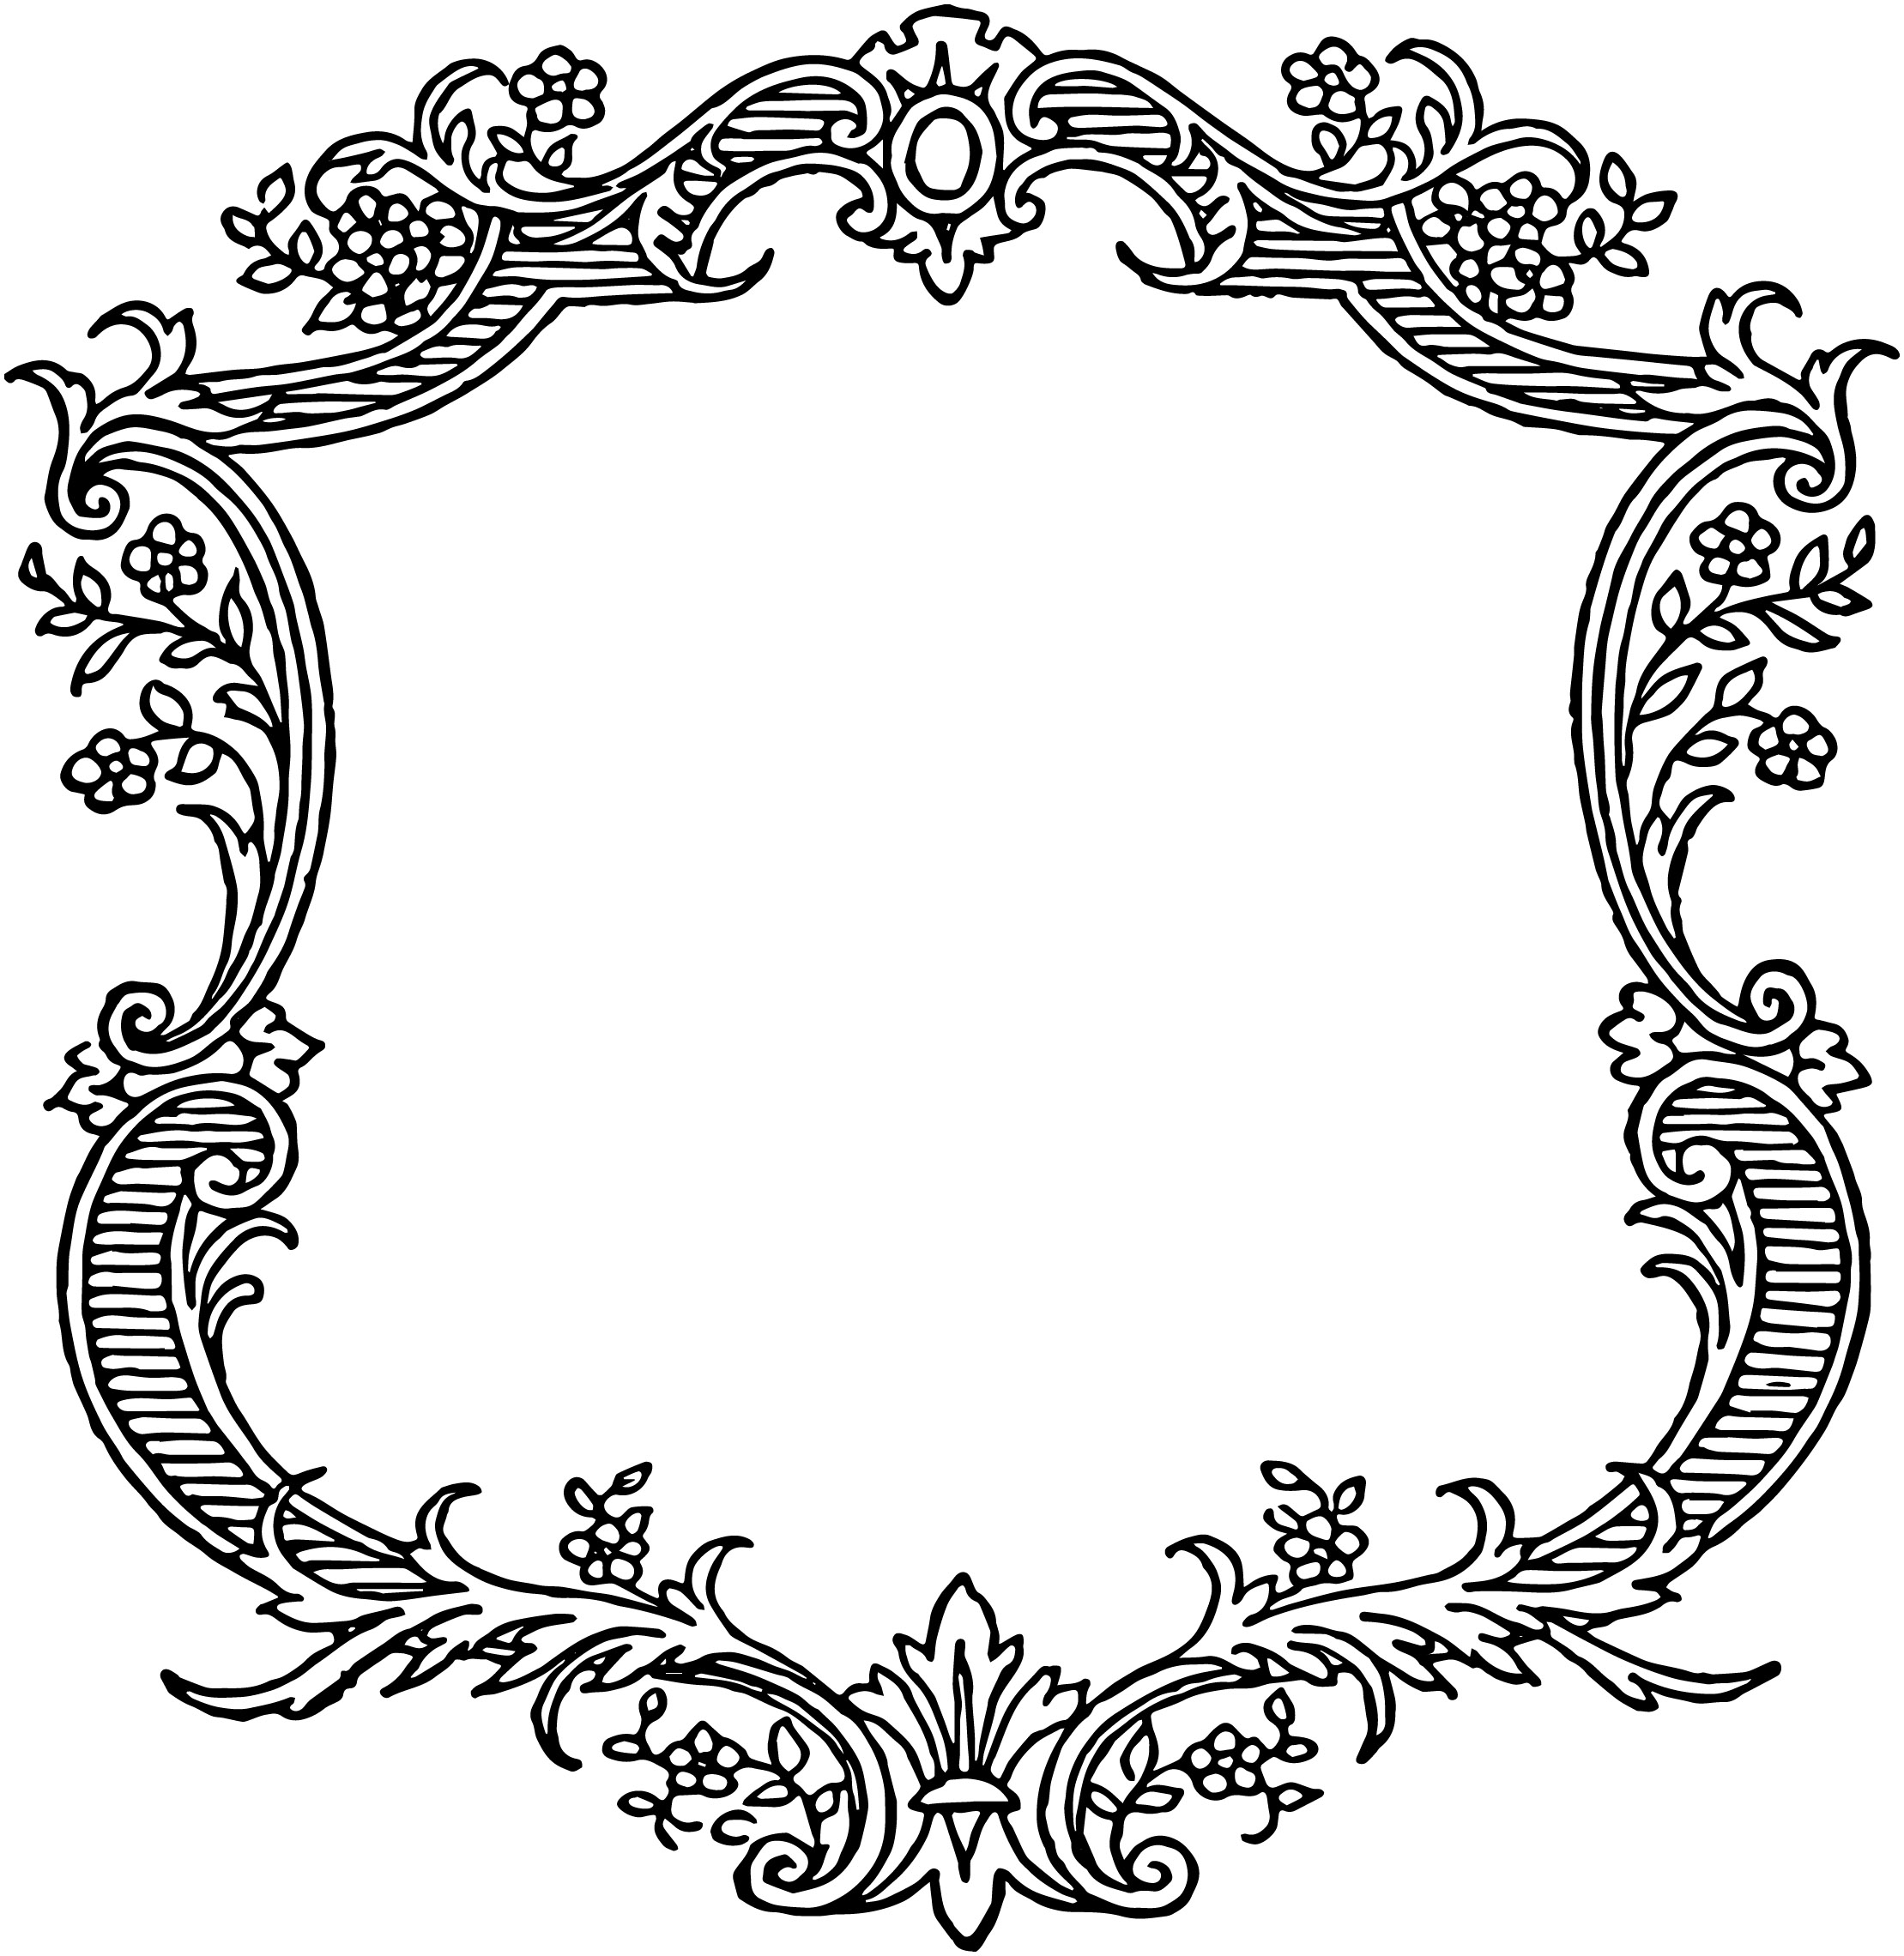 Frame Vector Png - Clipart library